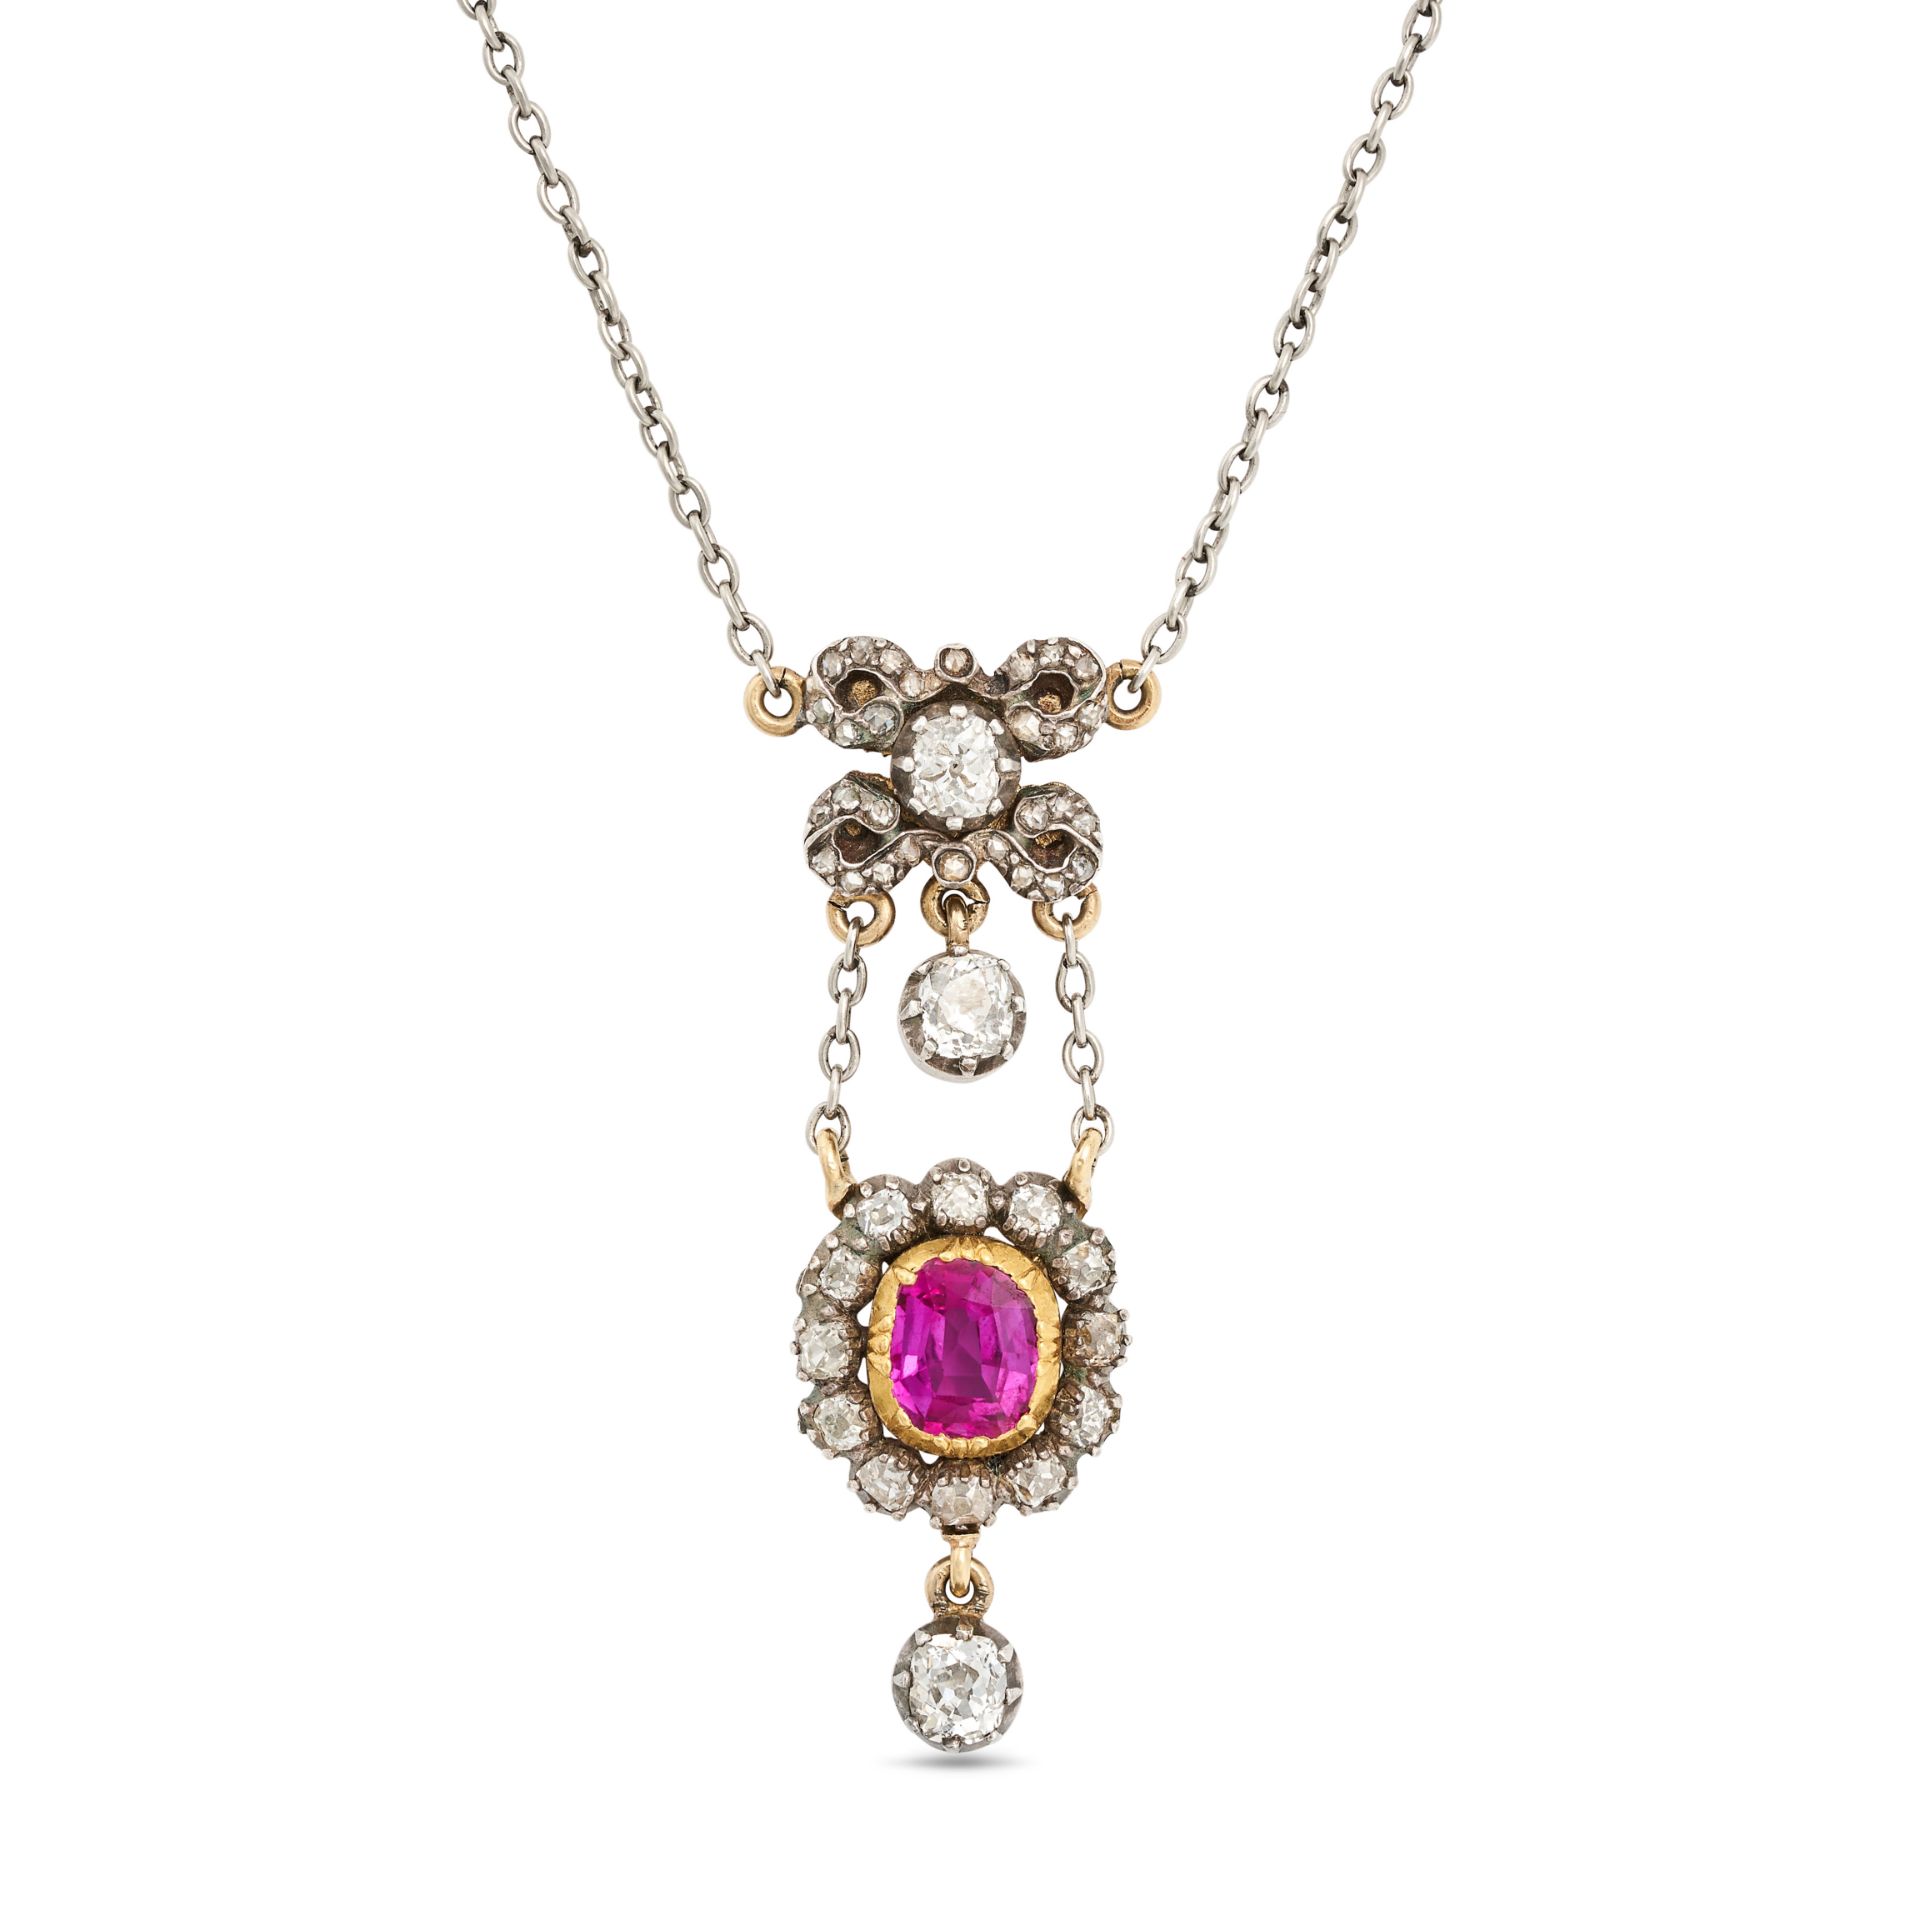 AN ANTIQUE RUBY AND DIAMOND PENDANT NECKLACE in yellow gold and silver, the pendant designed as a...